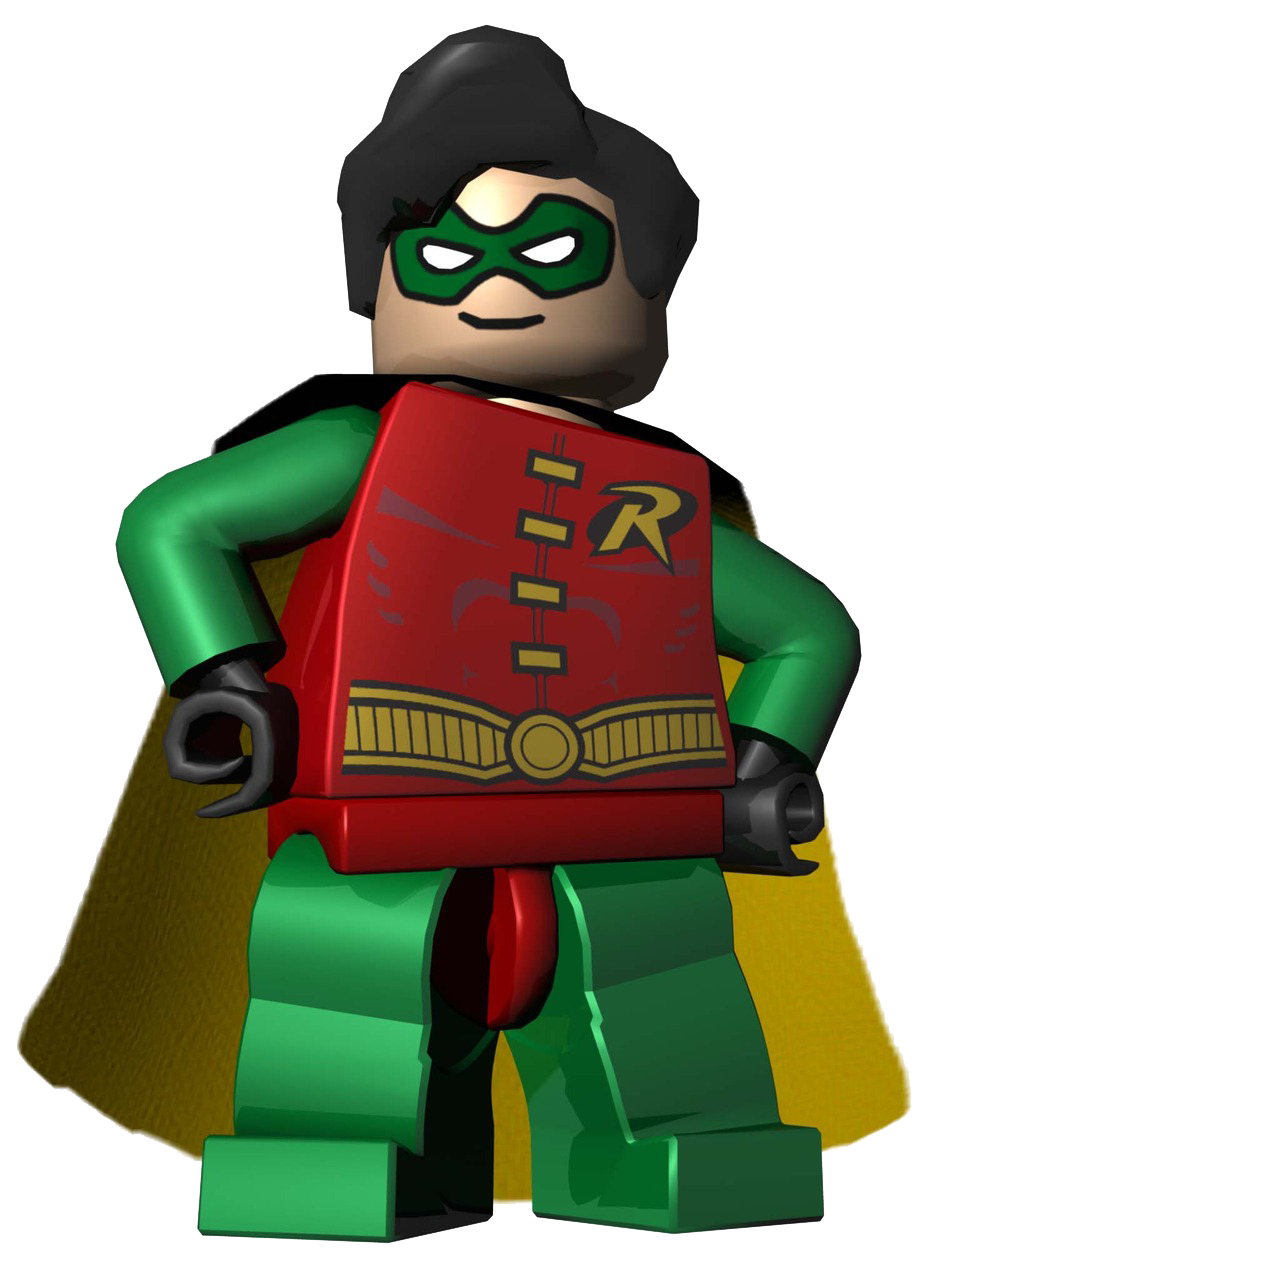 Download PNG image - Lego Movie PNG Image 